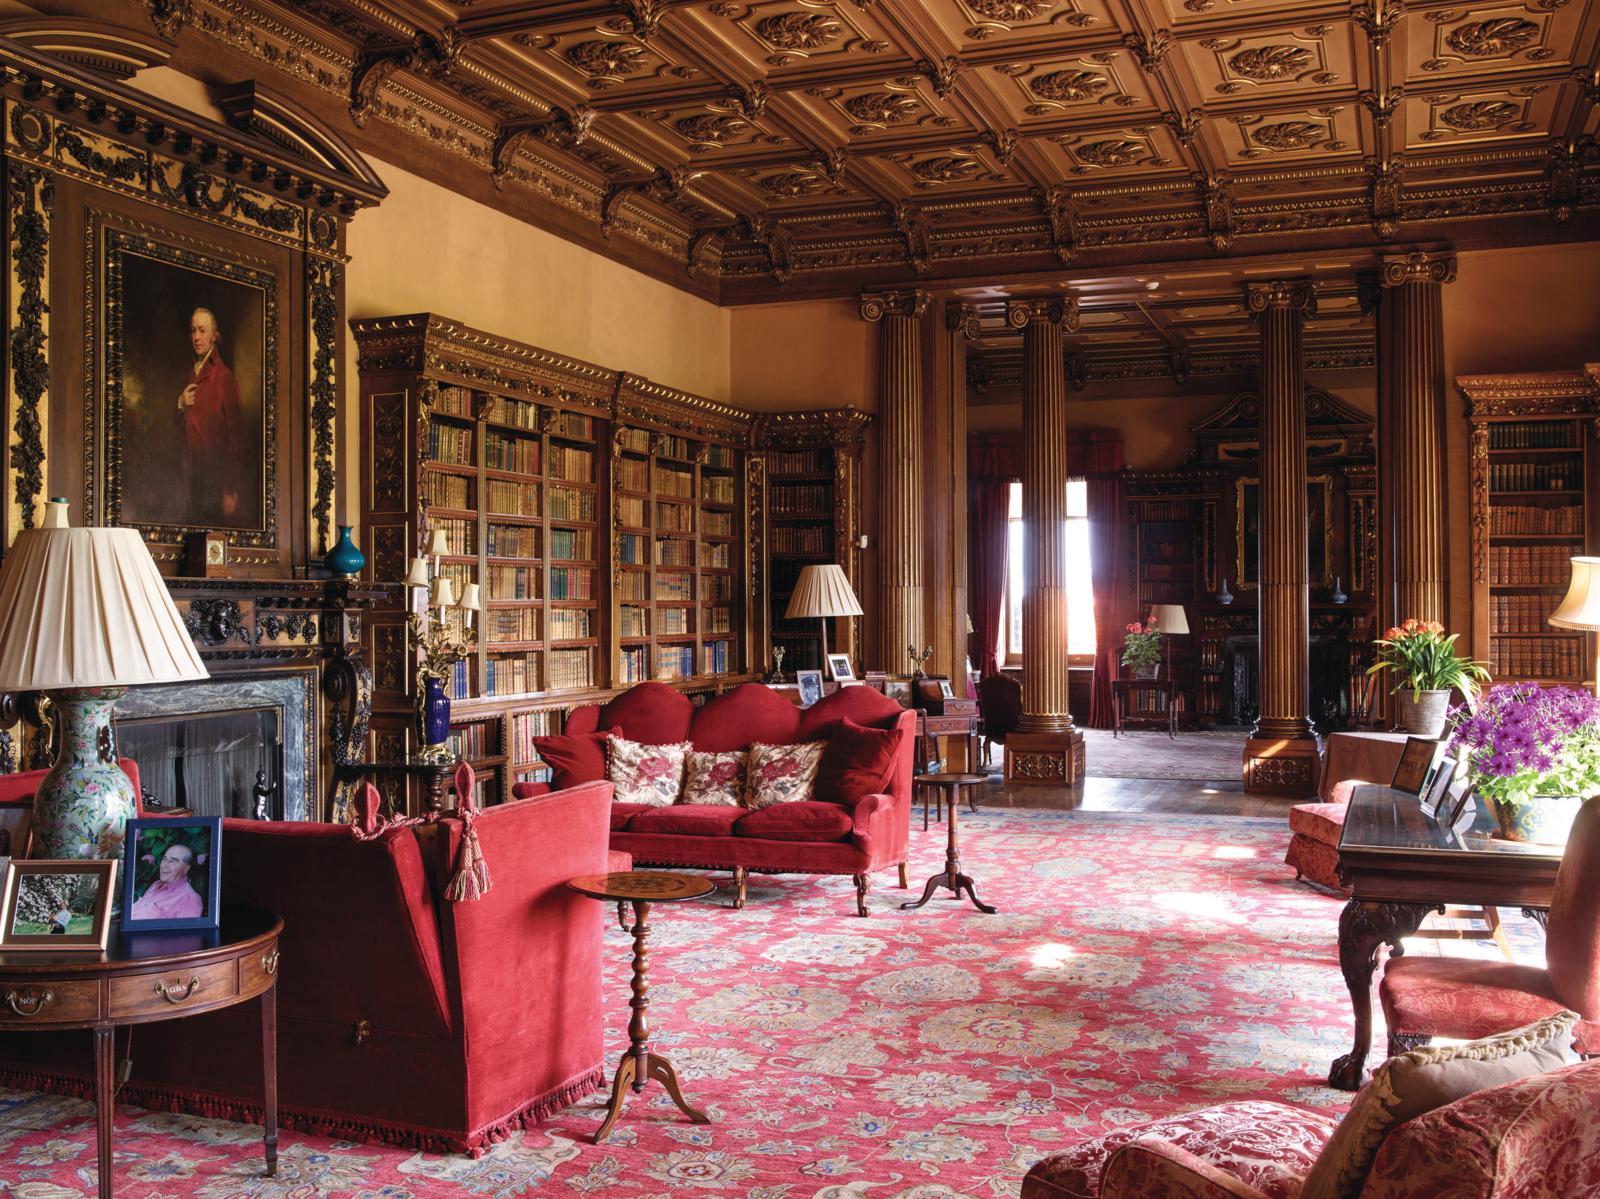 Exclusive: Meet the Household of the Real-Life Downton Abbey - Discover  Britain